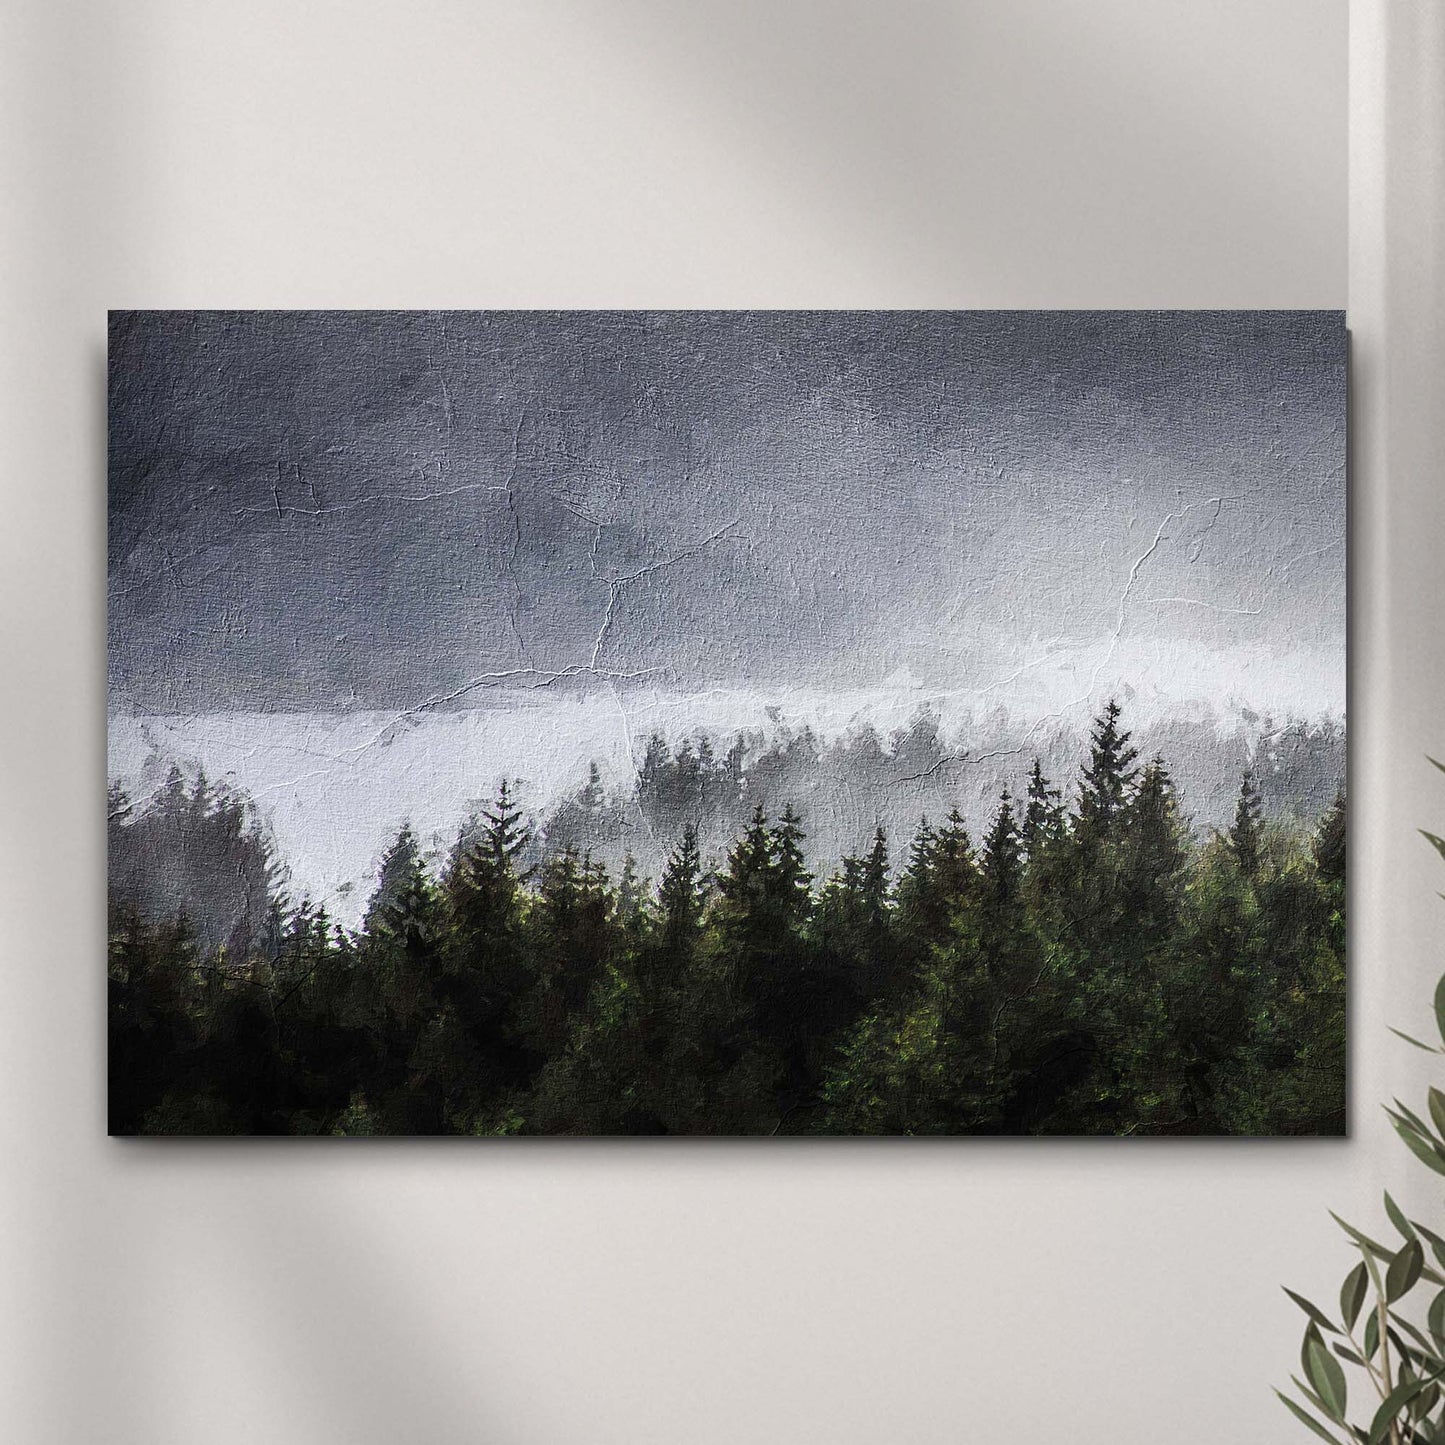 Into The Mist Among The Forest Canvas Wall Art - Image by Tailored Canvases